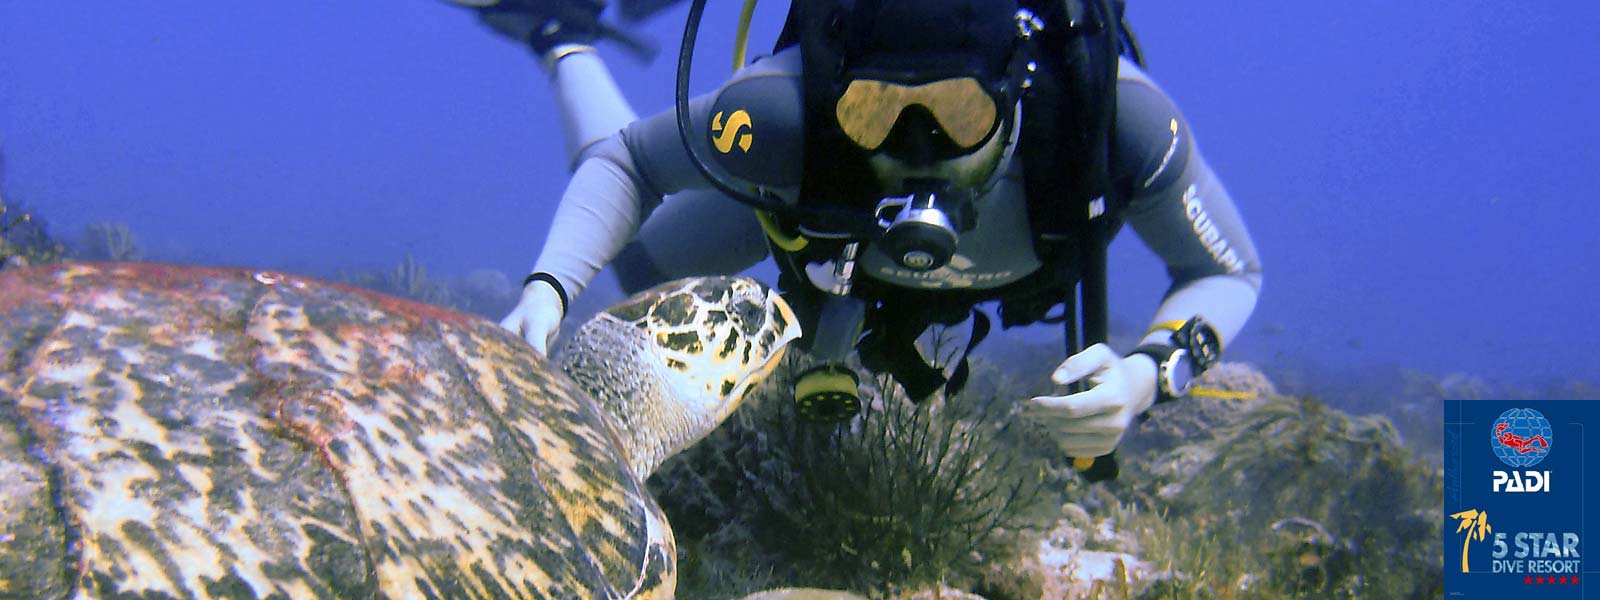 Diver with turtle